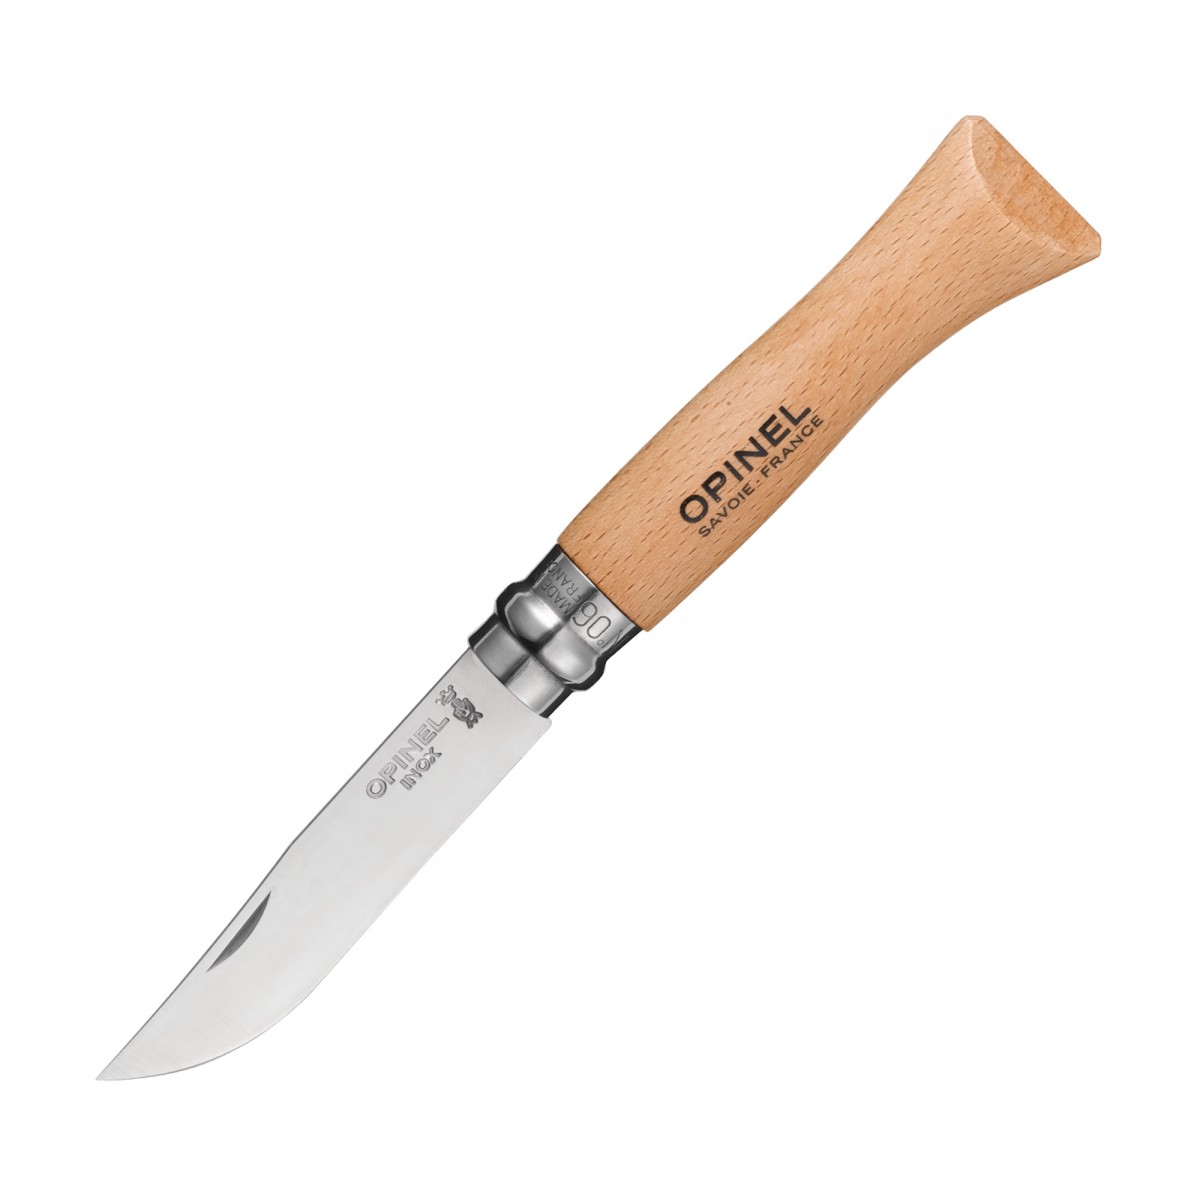 Opinel stainless steel